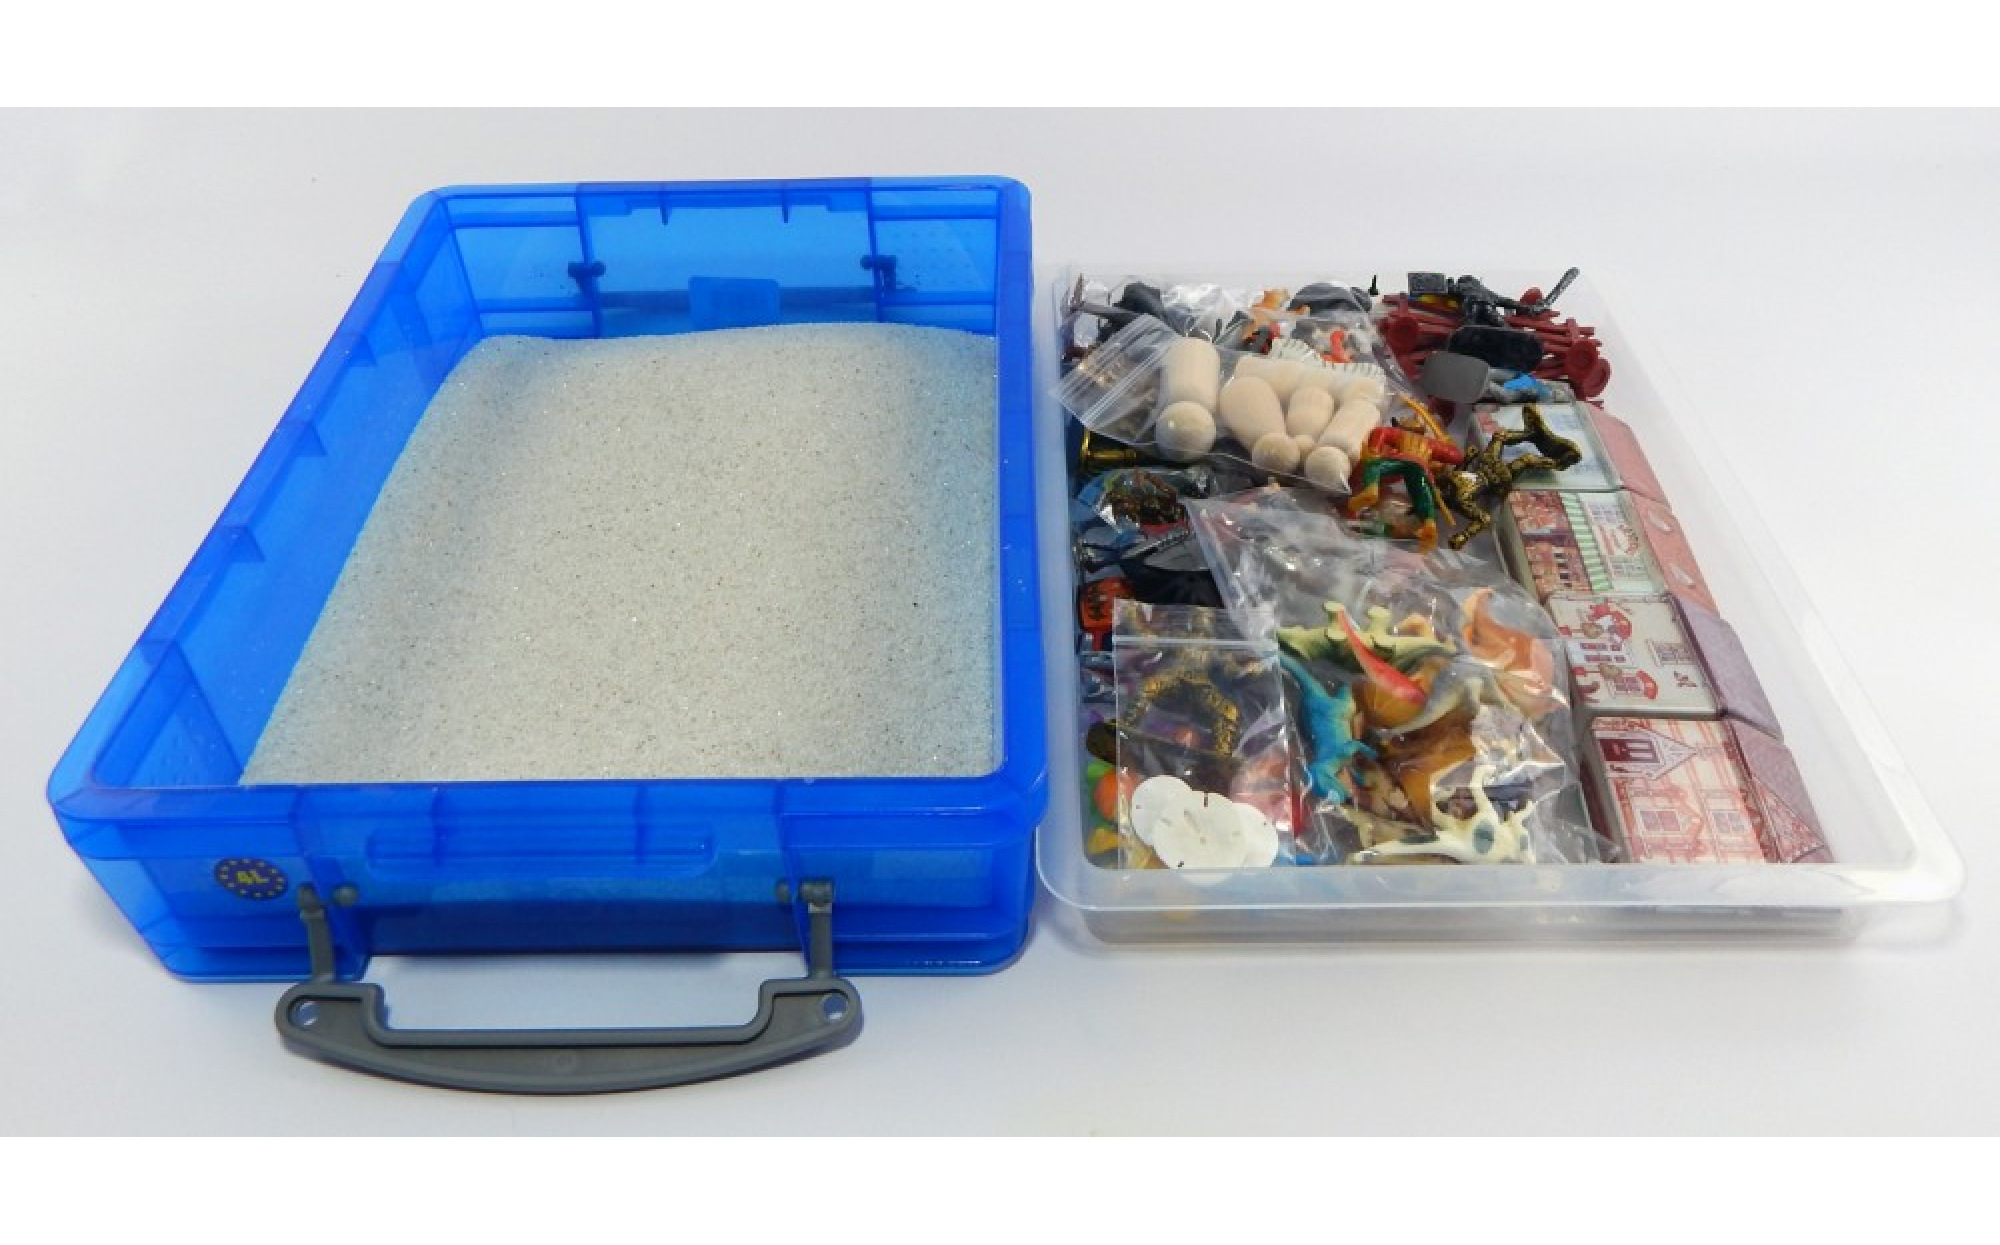 Personal Sand Tray Mini Kit – Sand Tray Therapy